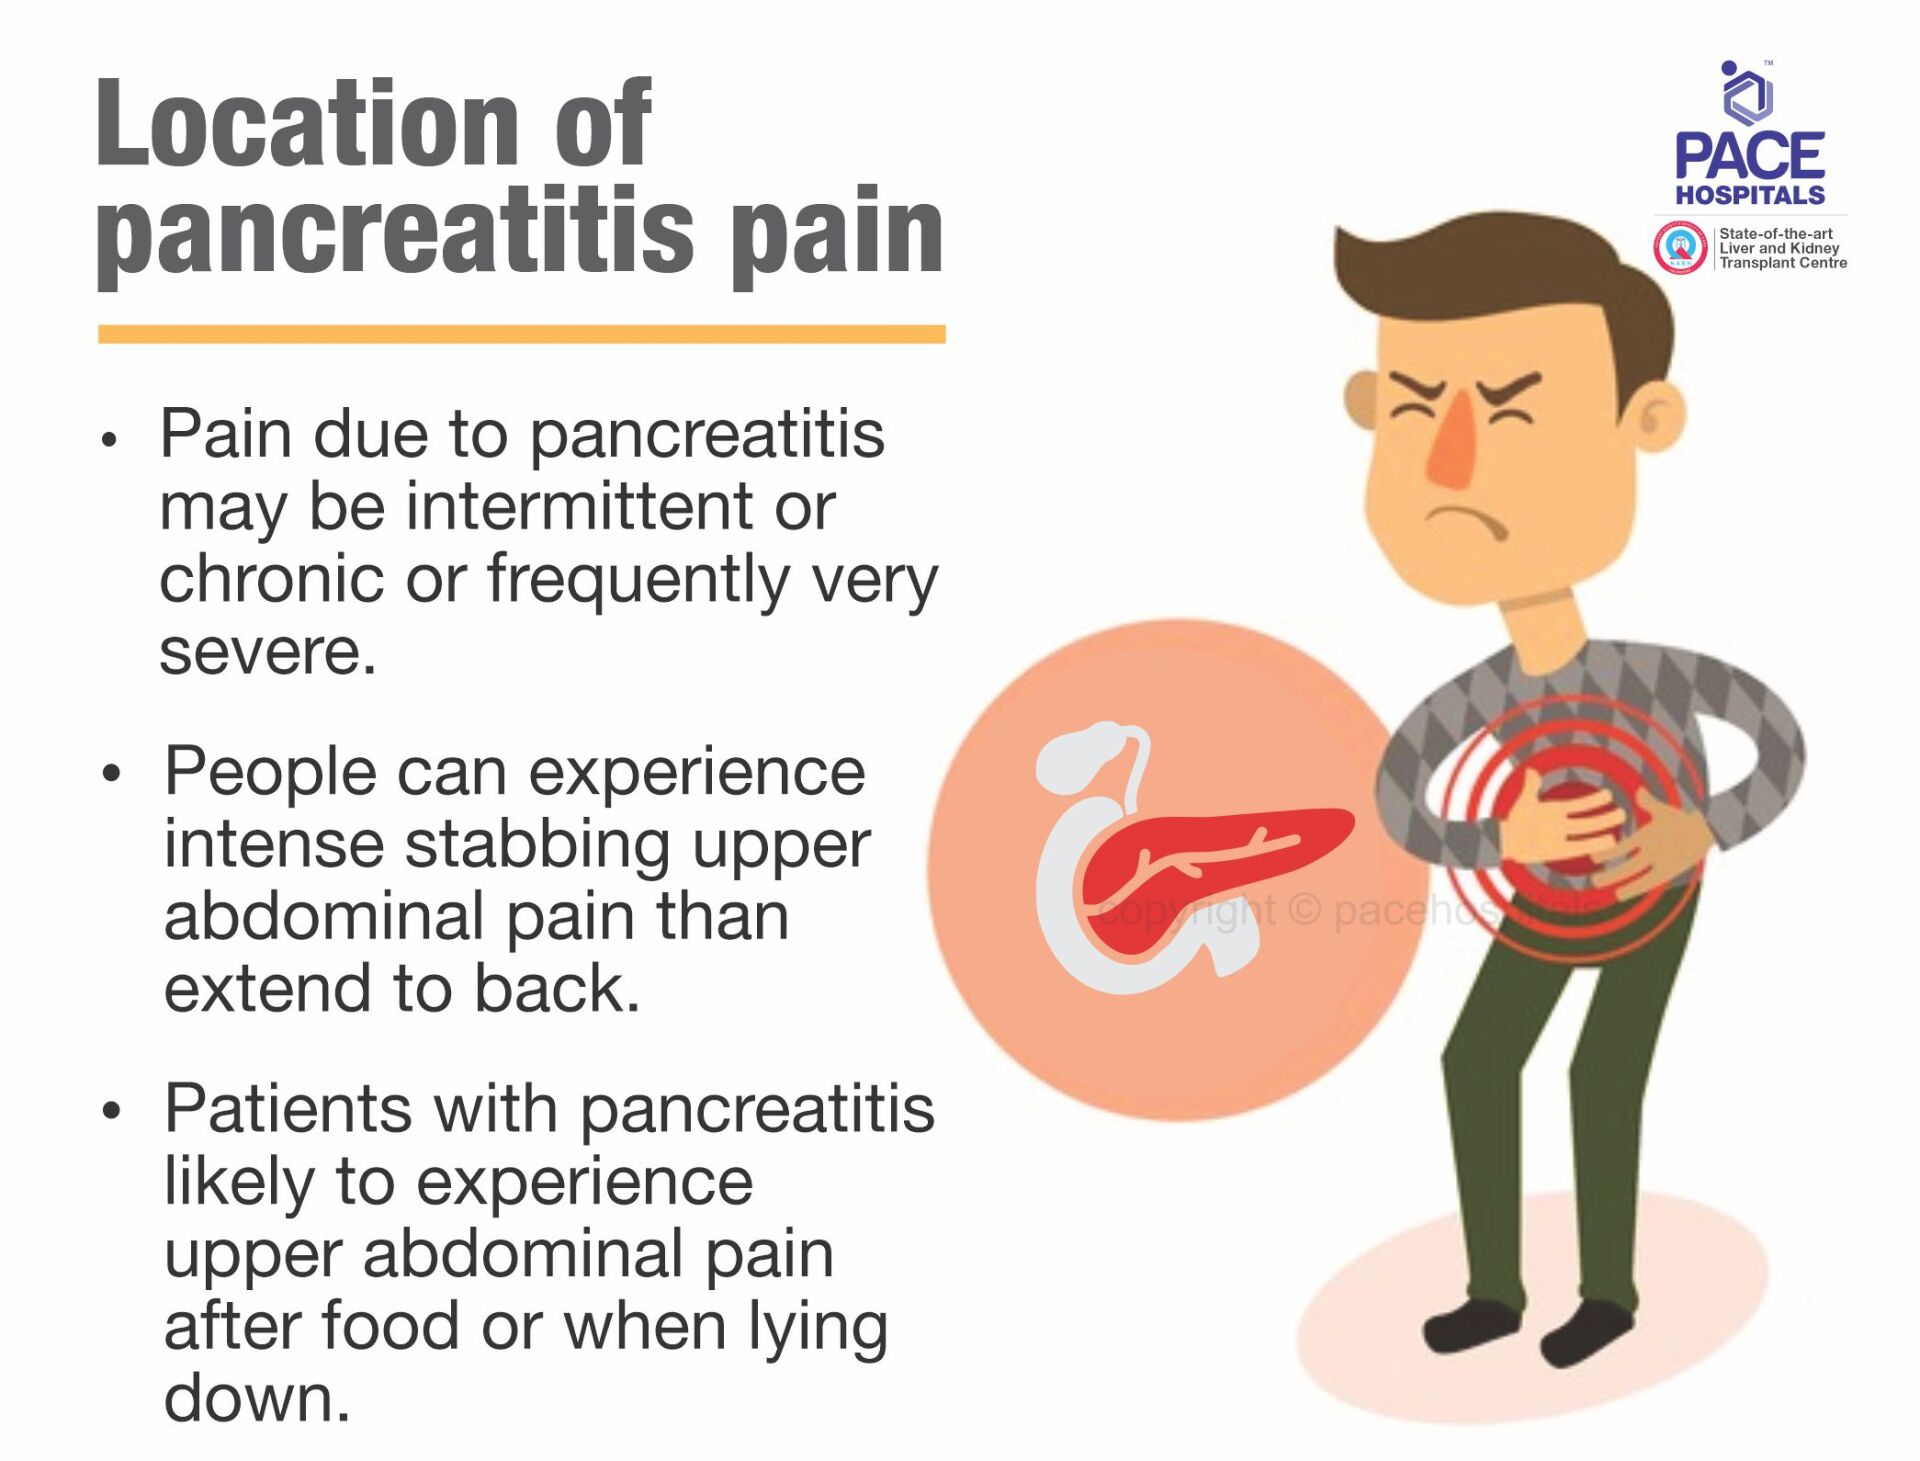 Pancreatitis Acute And Chronic Symptoms Causes And Treatment